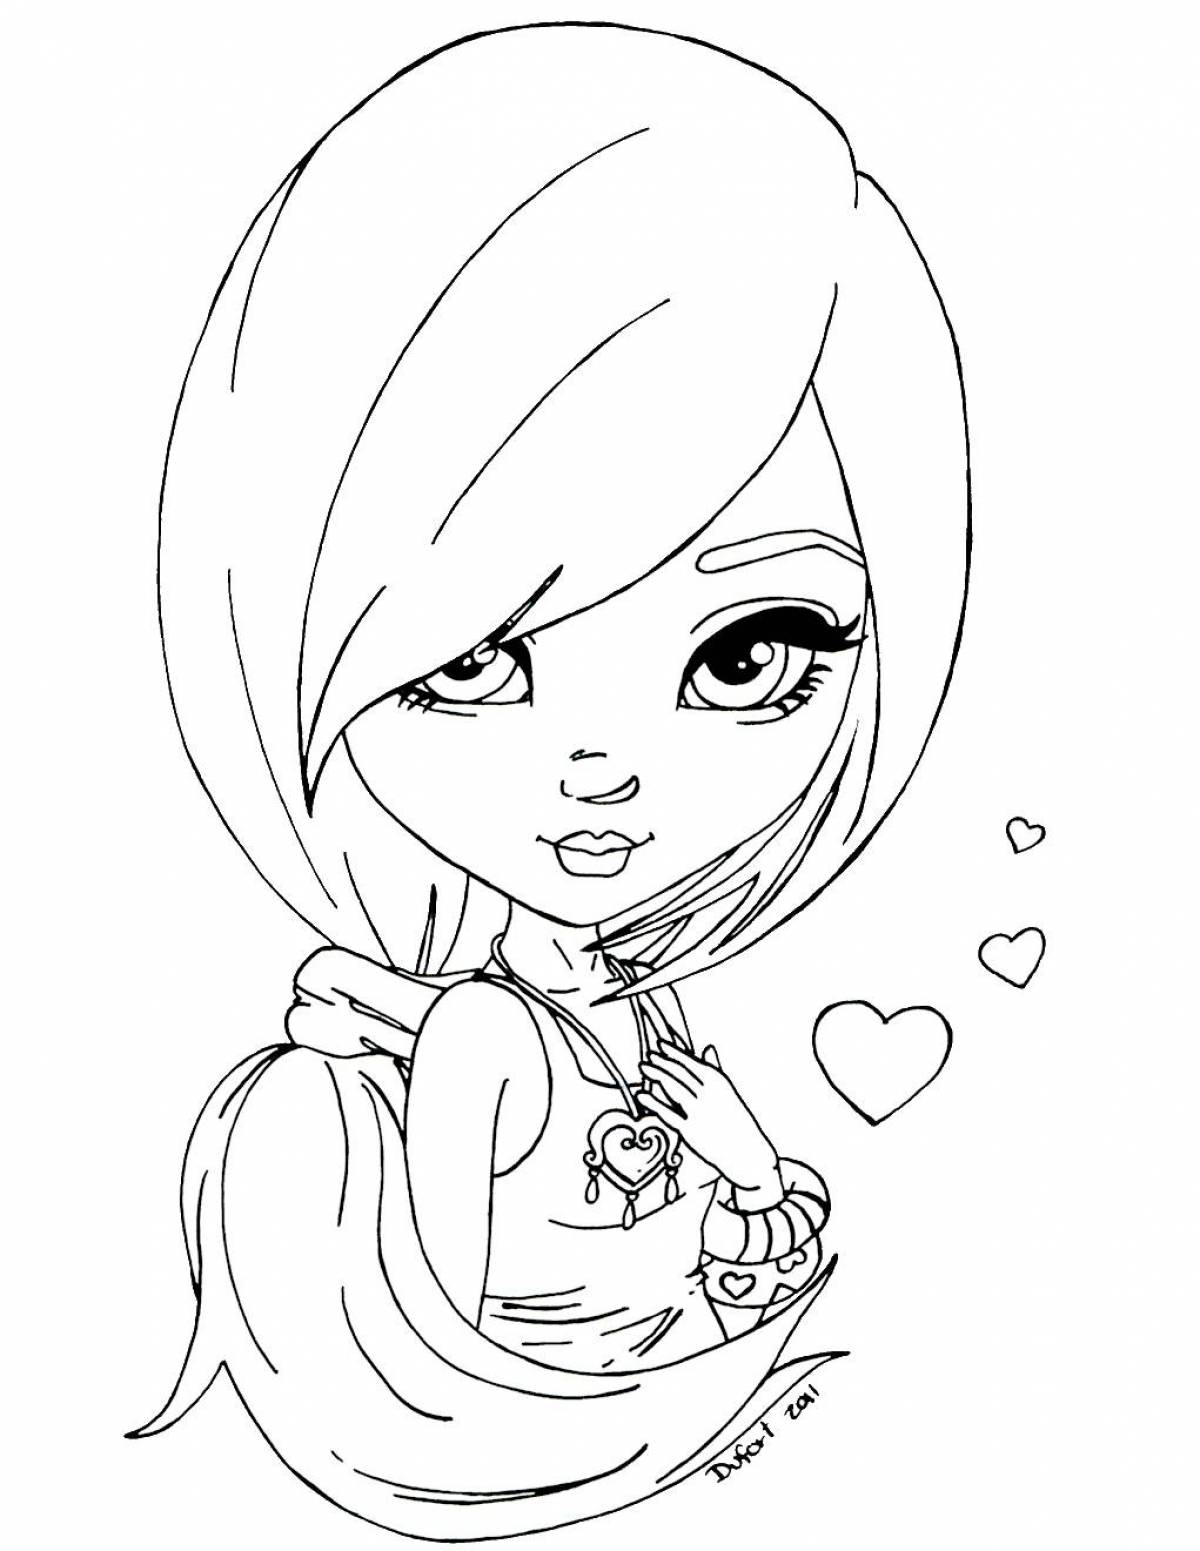 Colorful coloring pages for girls